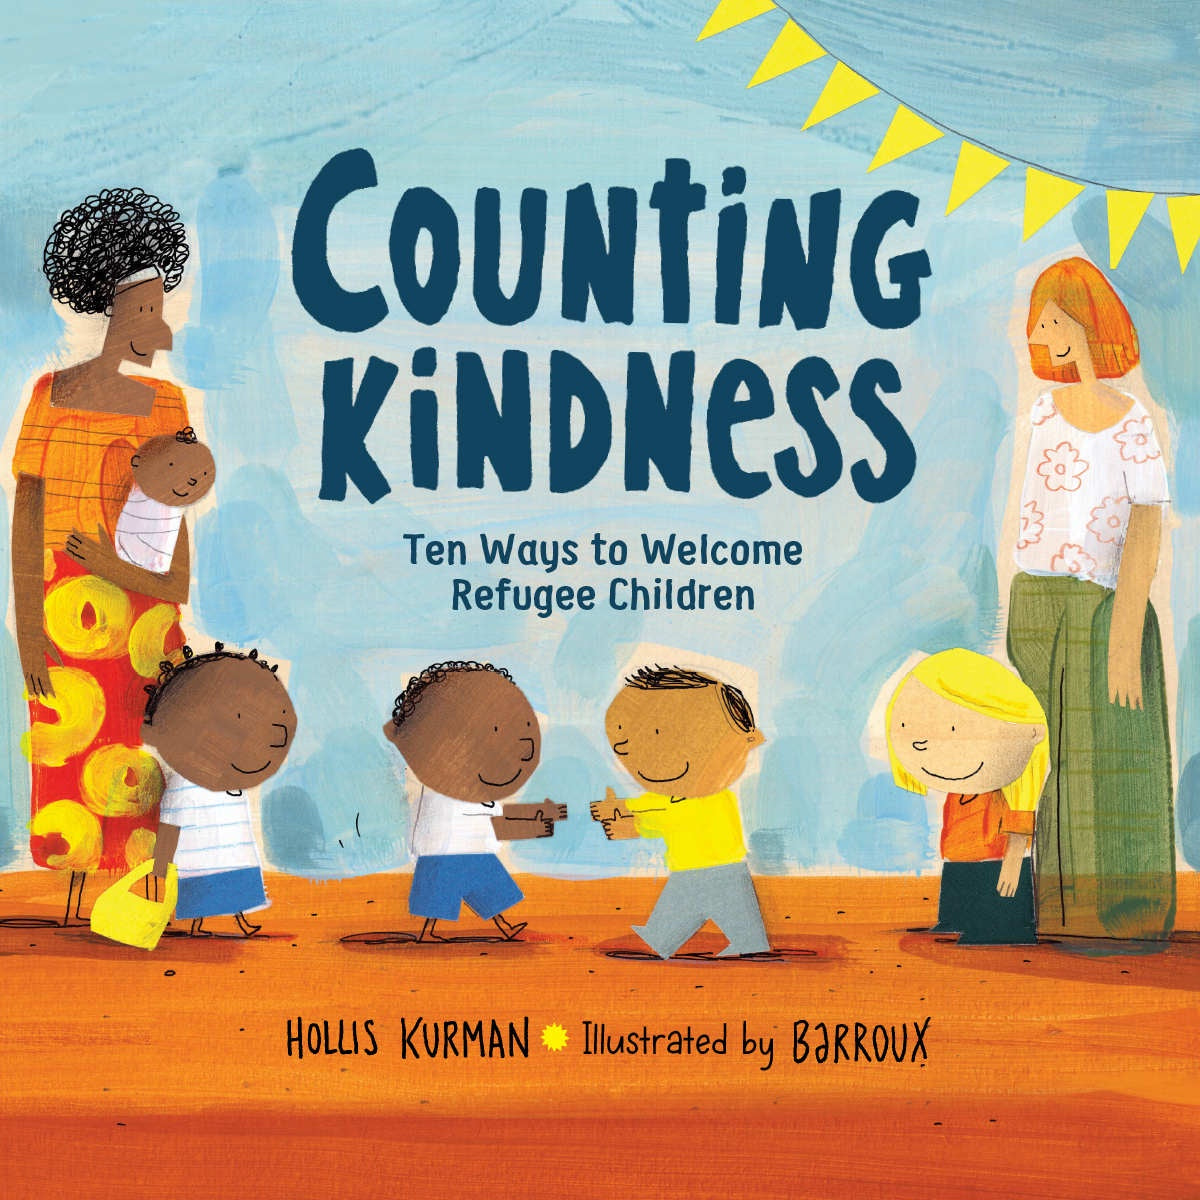 Counting Kindness - Ten Ways to Welcome Refugee Children